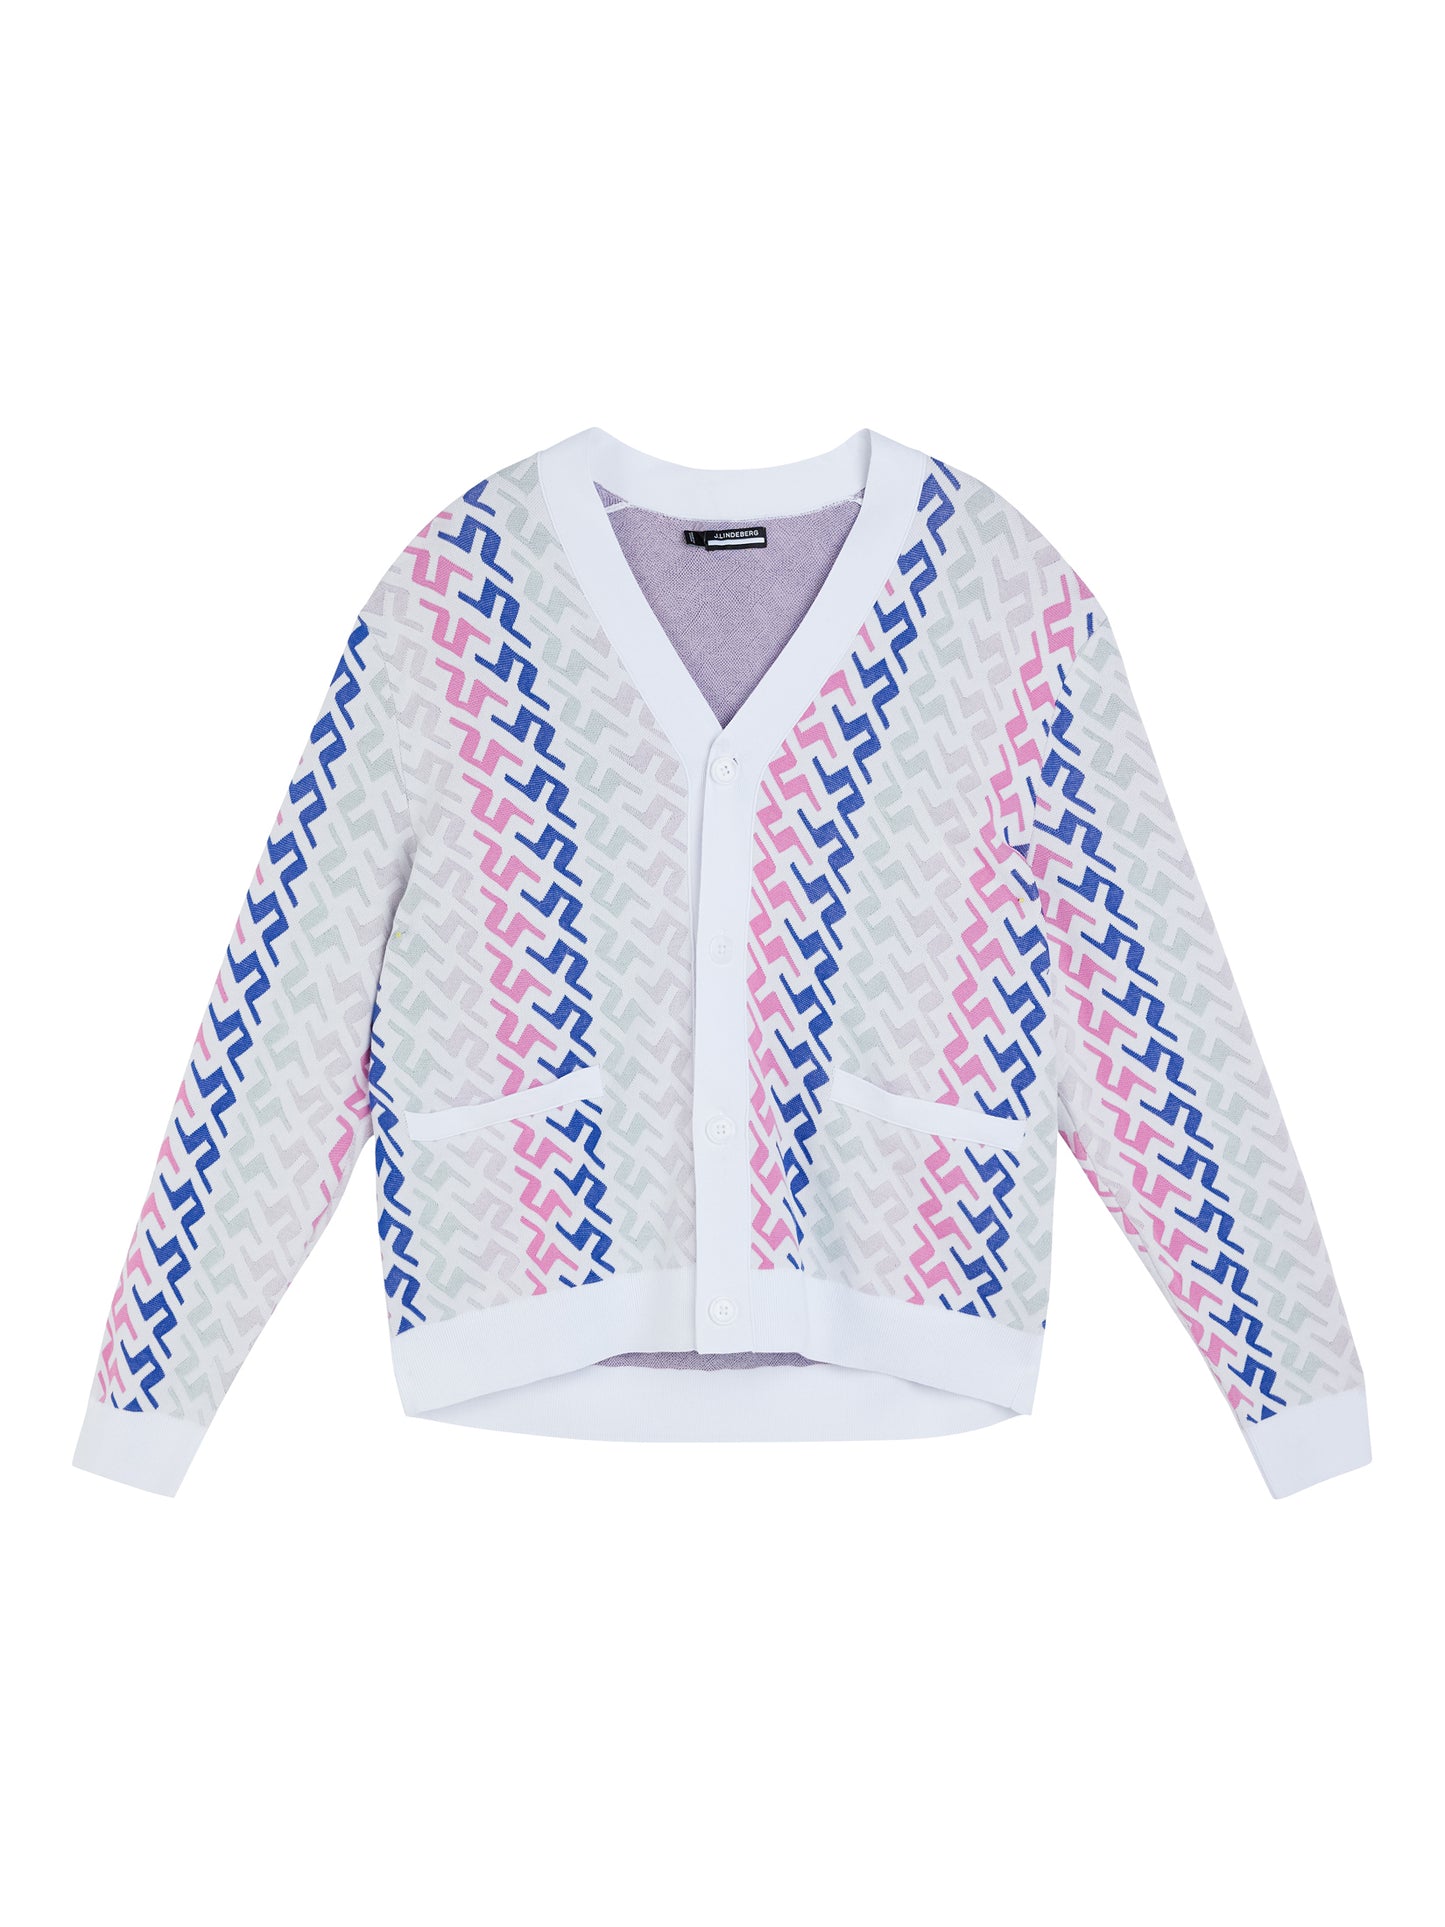 Vice Knitted Sweater / Pink Painted Bridge